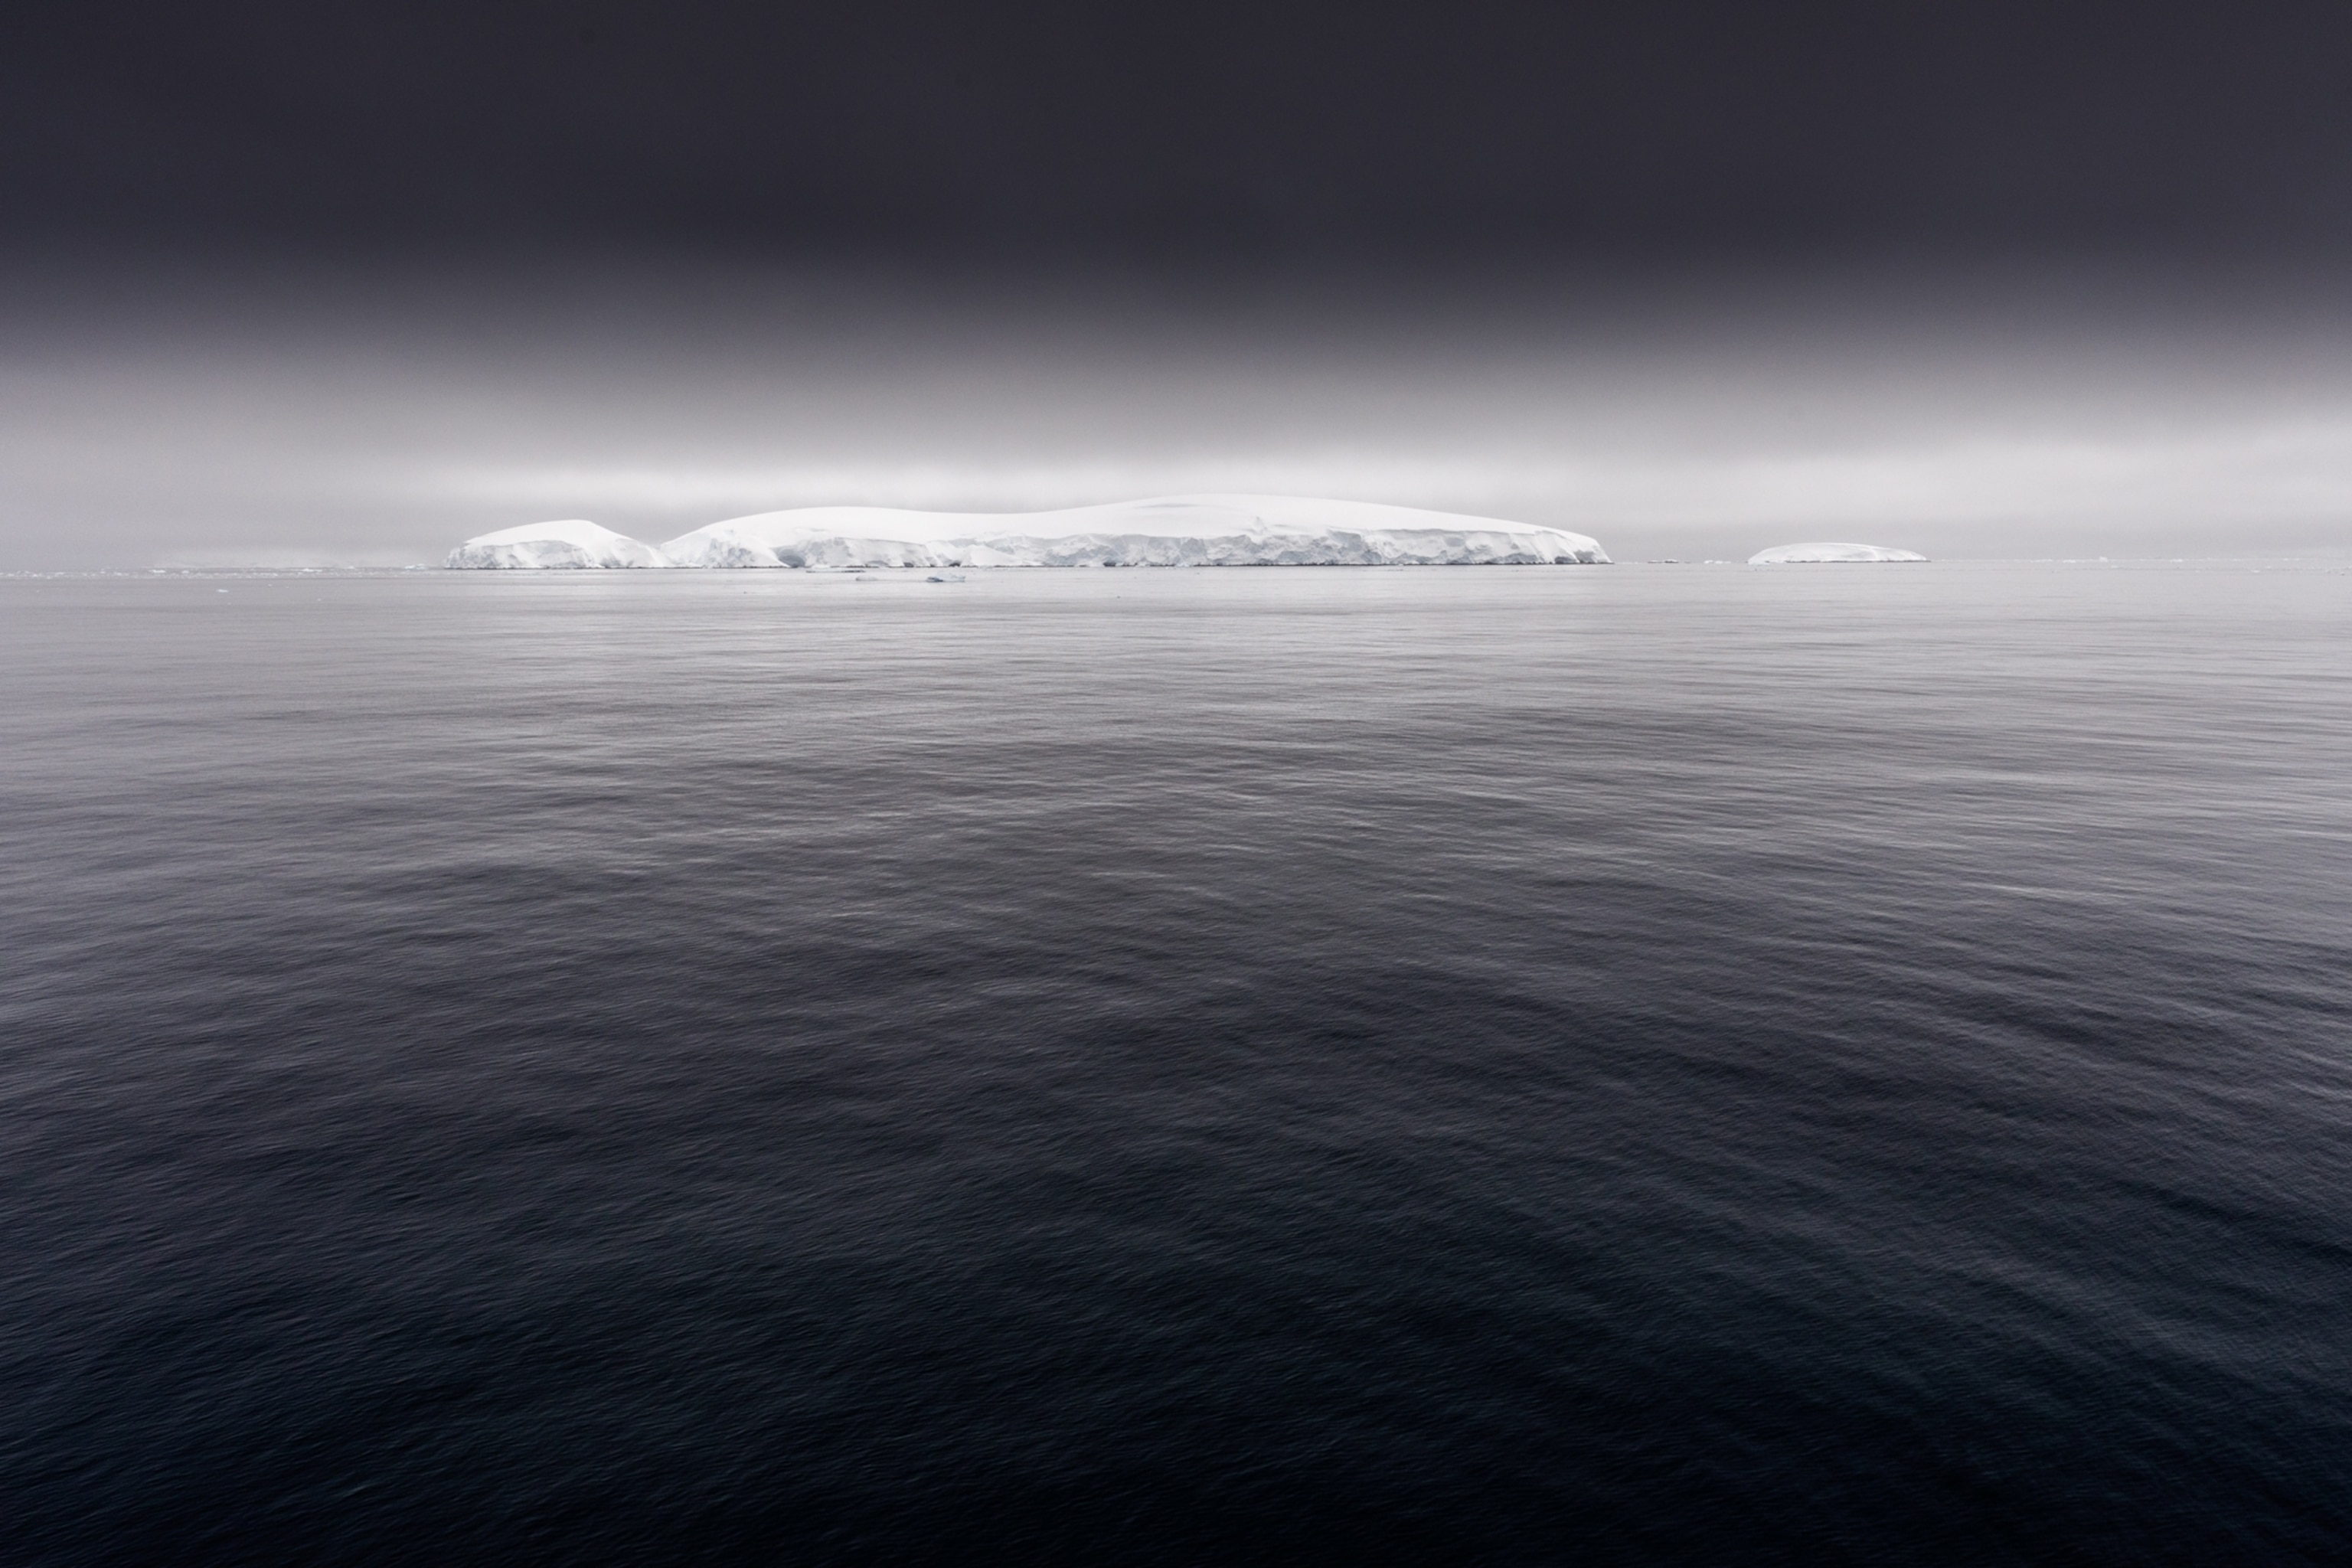 clouds and dark water around ice covered islands in the Gerlache Strait